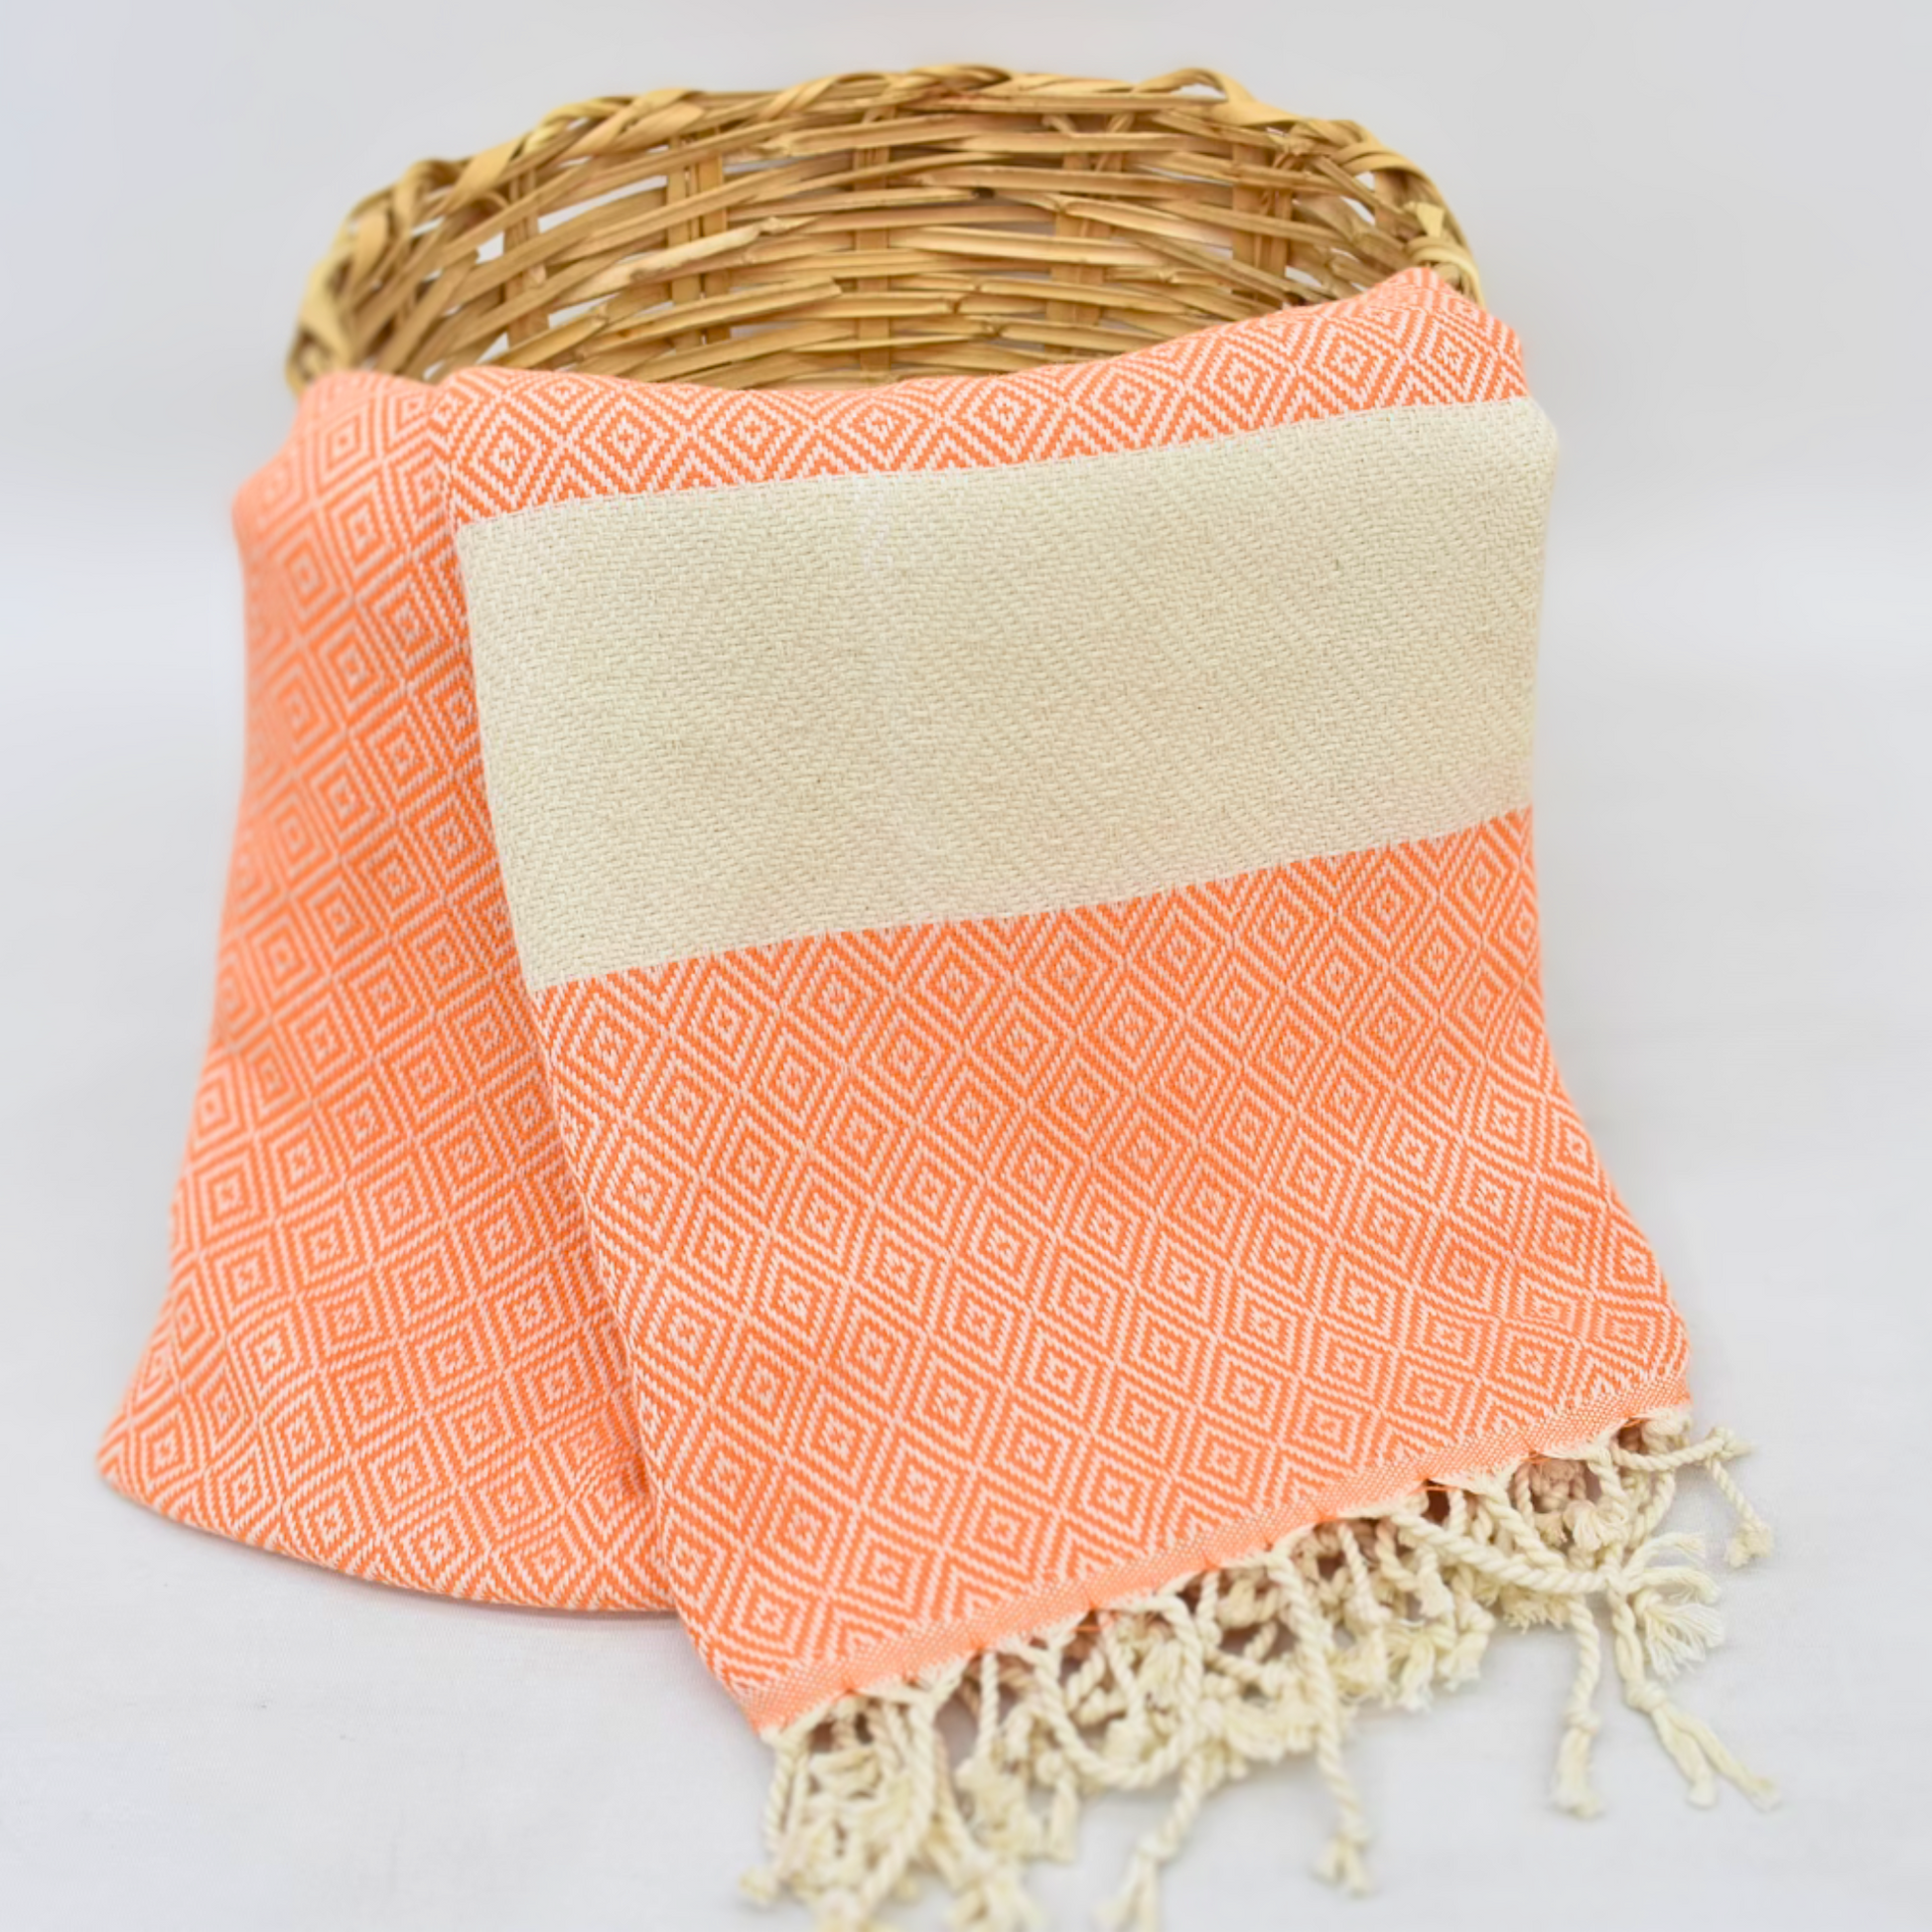 Turkish towel with an orange diamond pattern and natural color stripes hanging from a basket, embodying autumn warmth and elegance with hand-tied knots